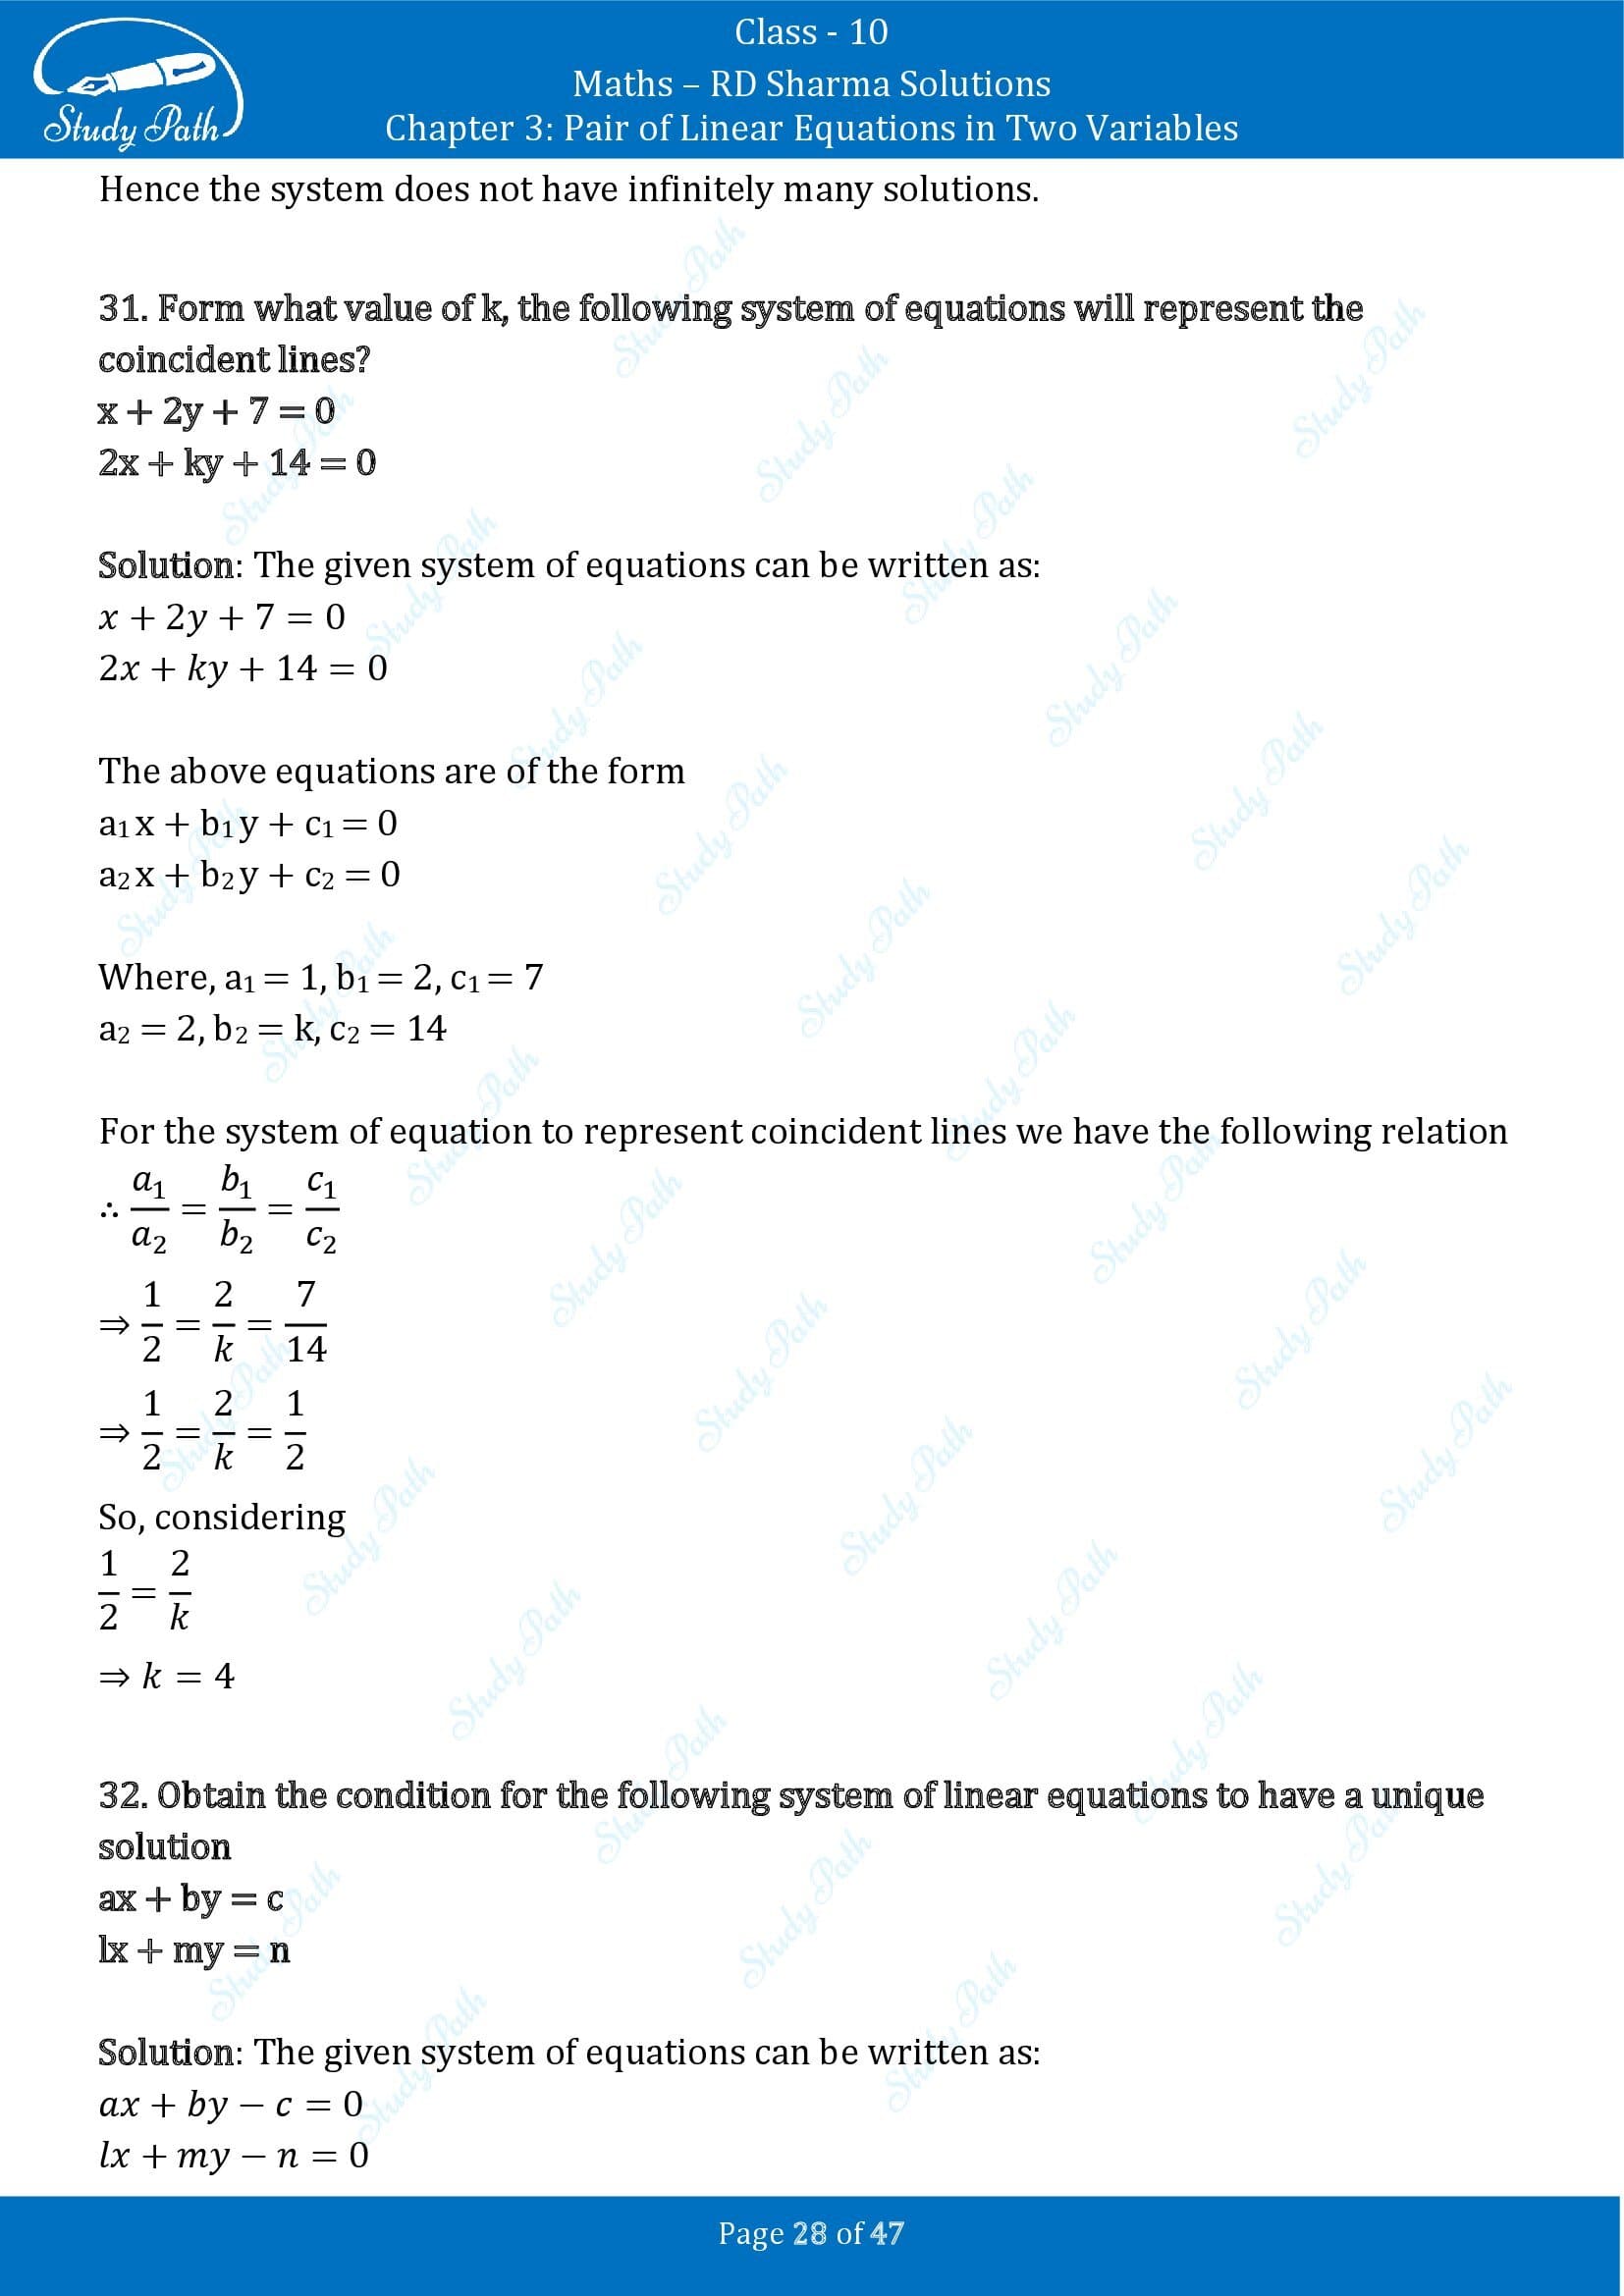 RD Sharma Solutions Class 10 Chapter 3 Pair of Linear Equations in Two Variables Exercise 3.5 00028